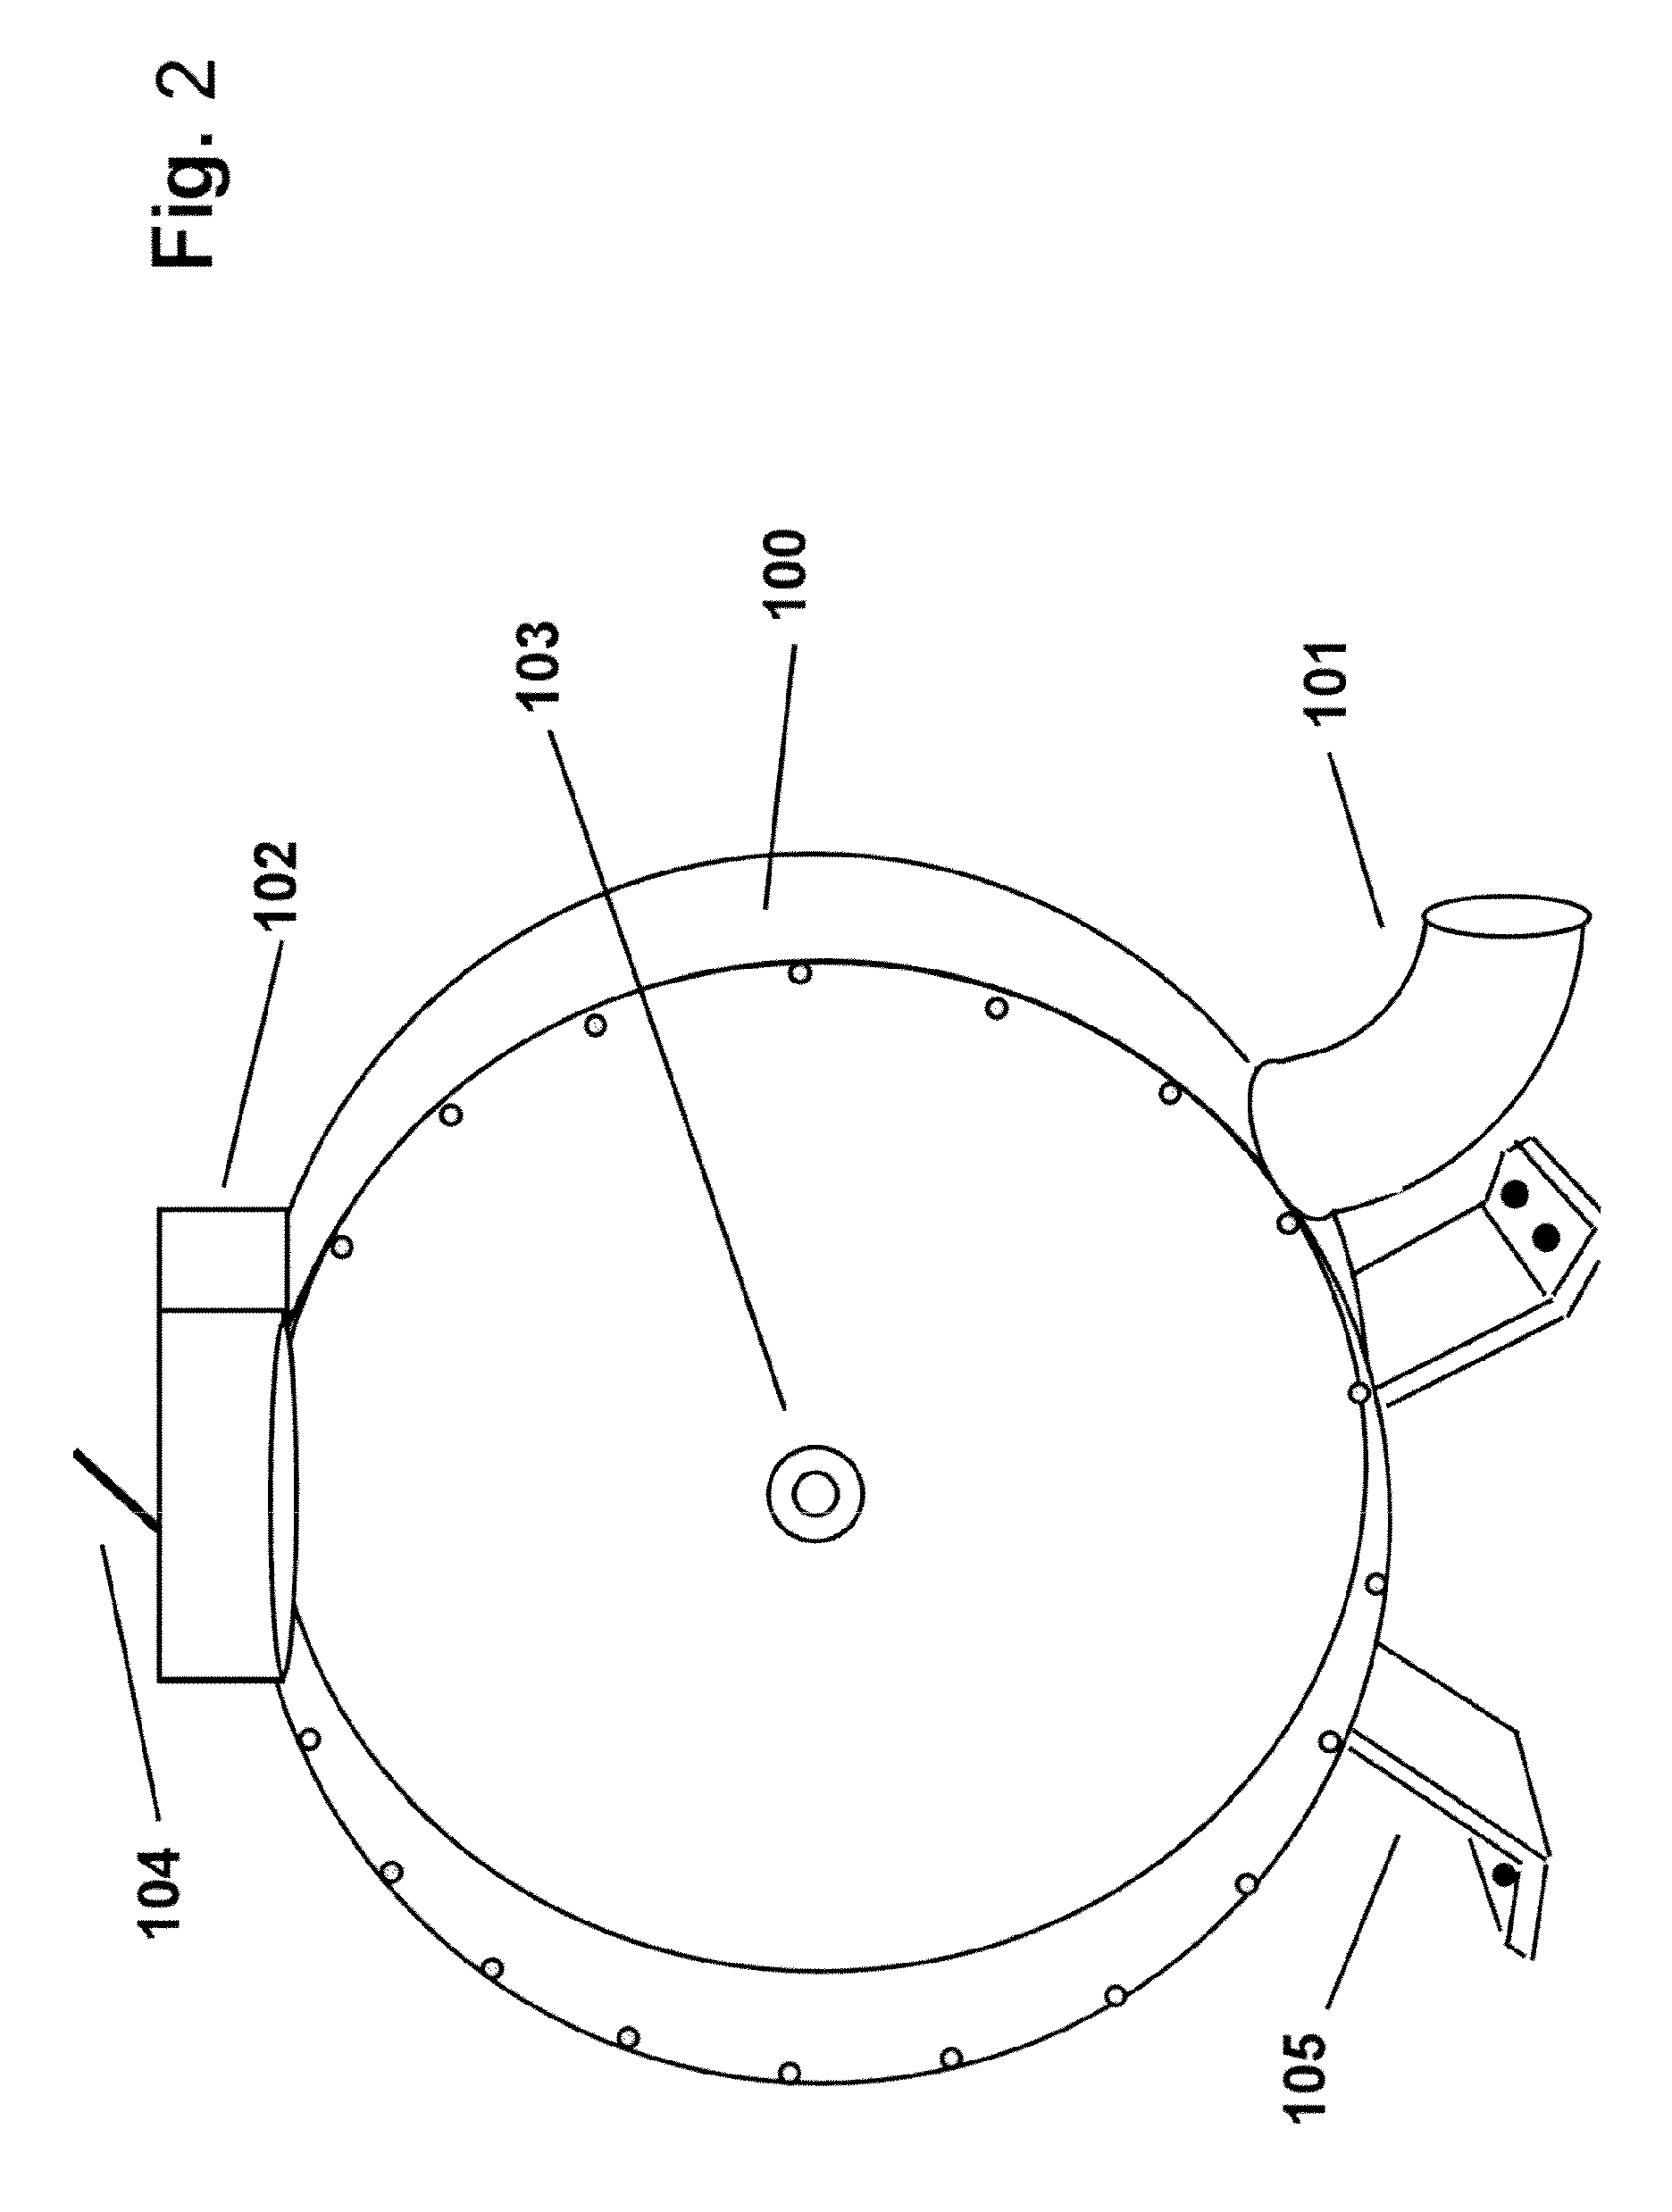 Hydroelectric device for harnessing the buoyant force of an object in a fluid